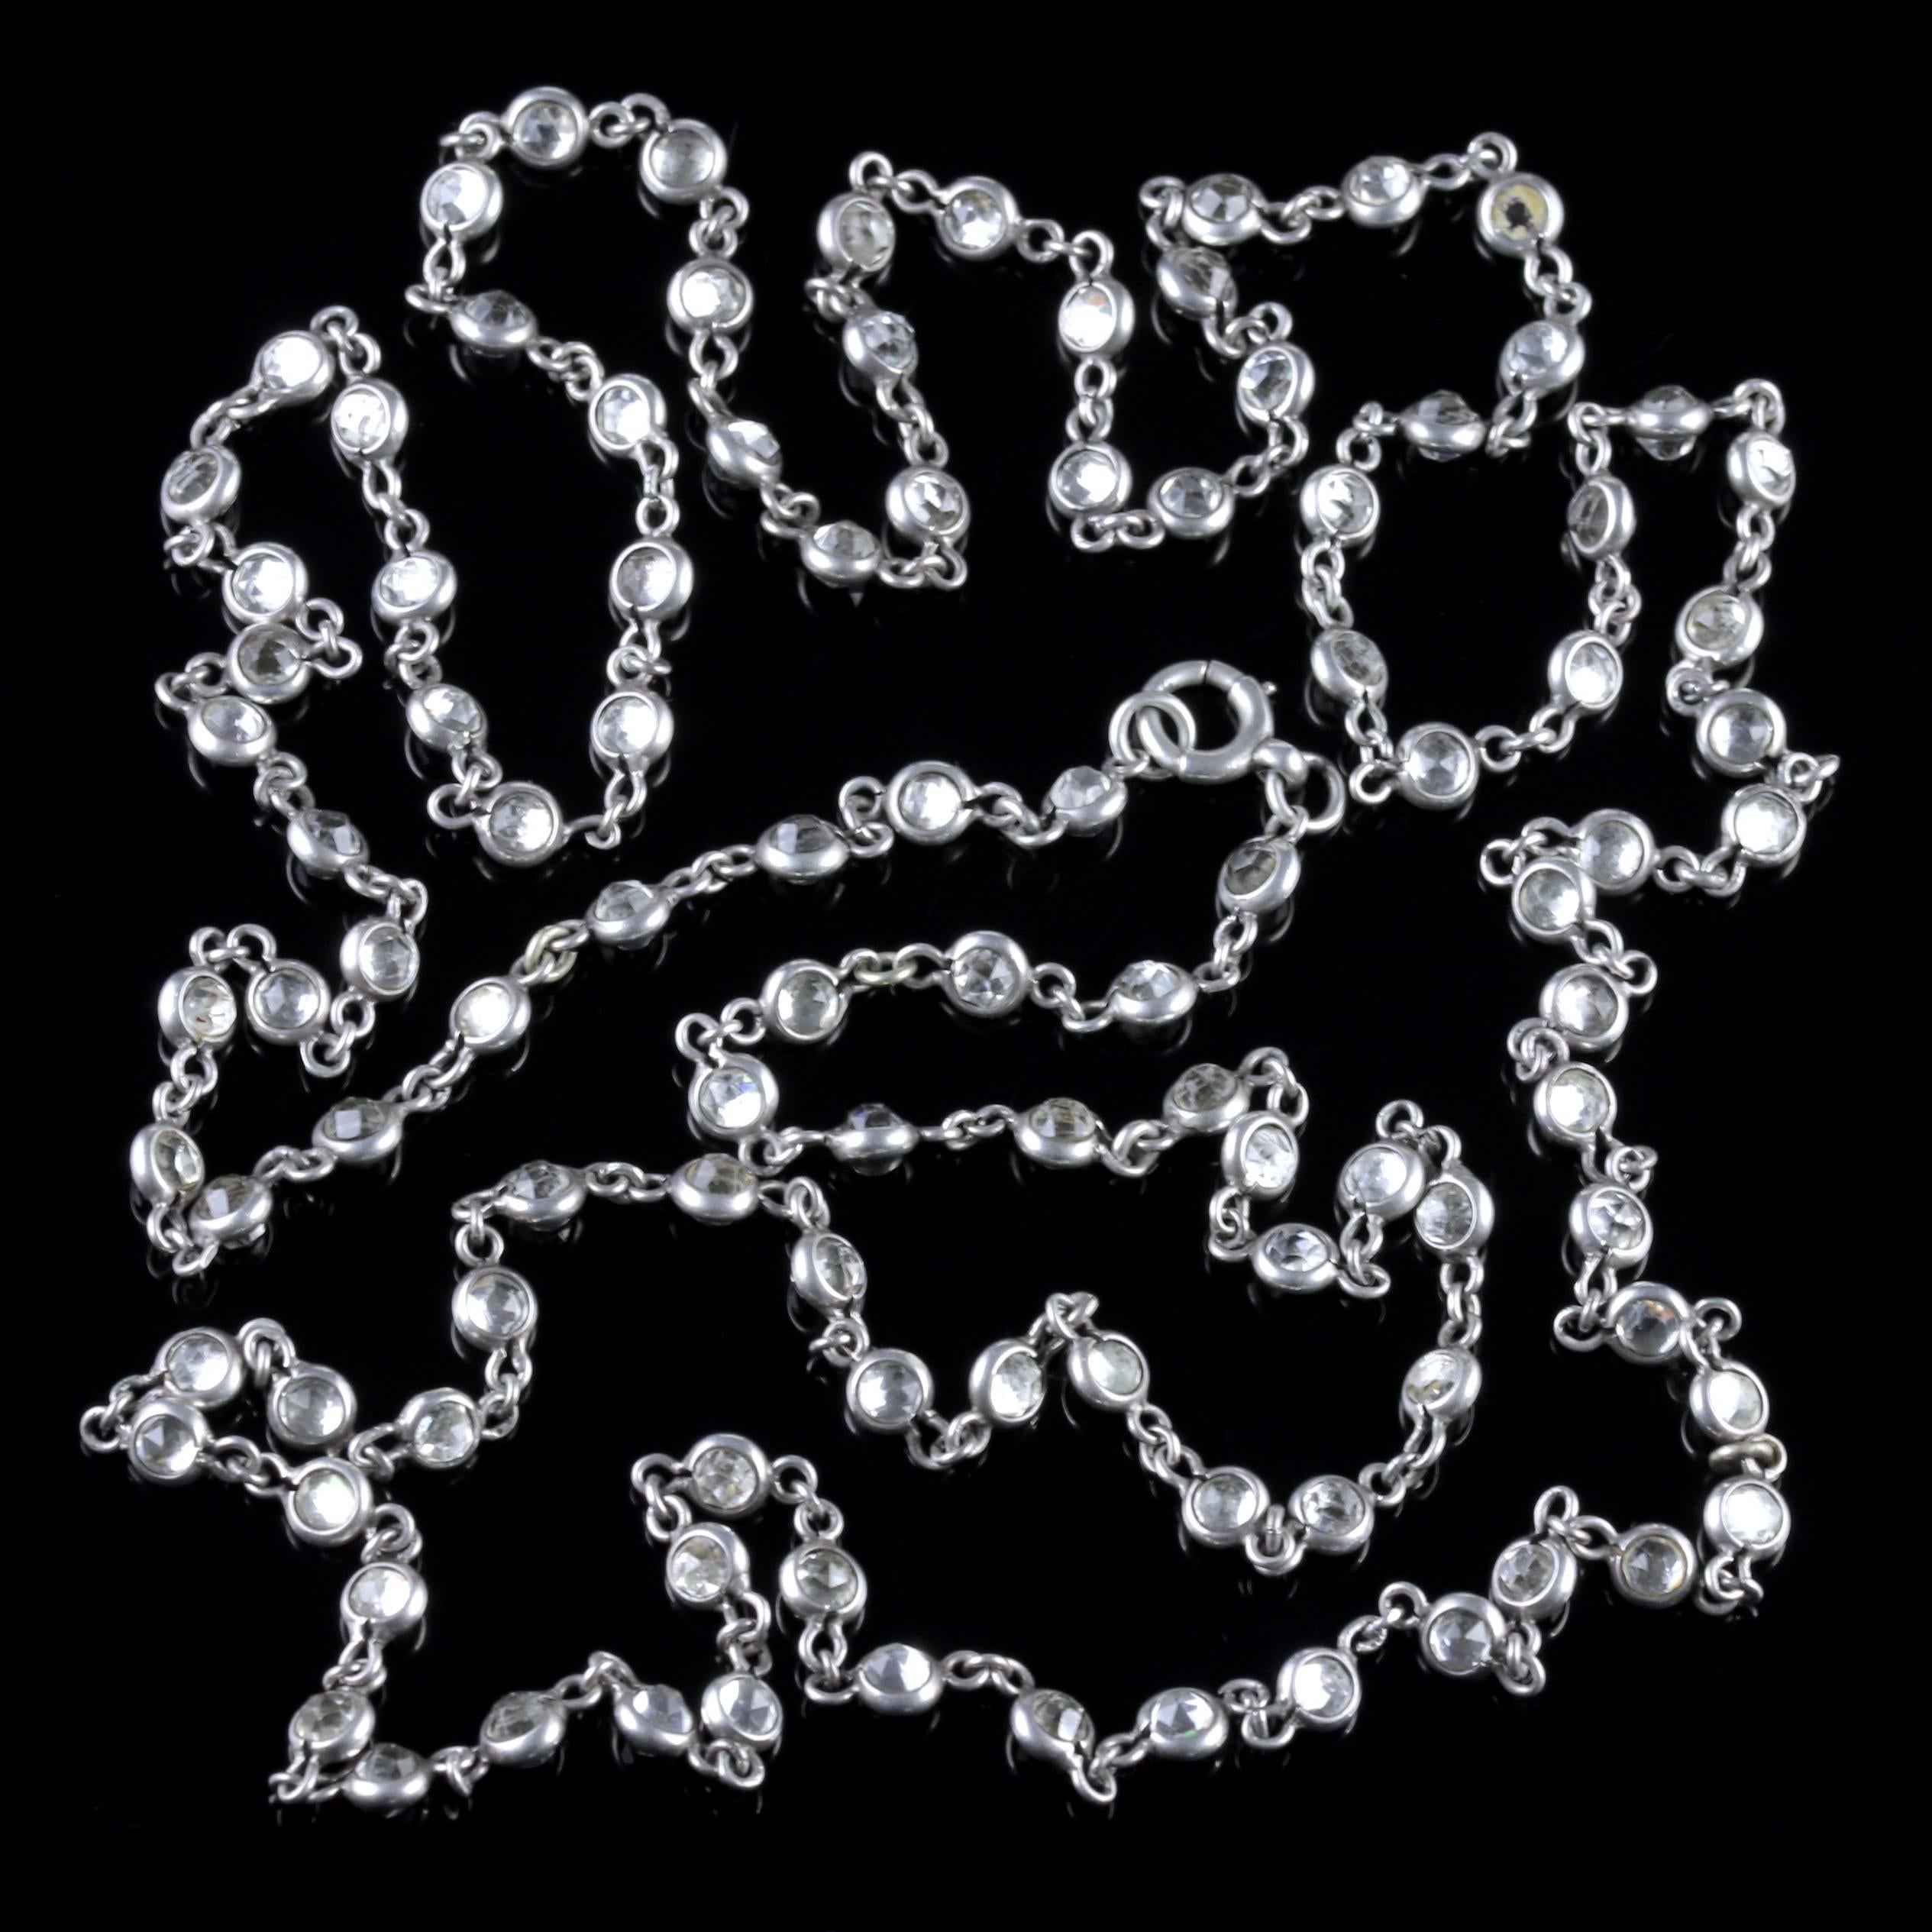 Antique Victorian Silver Chain Necklace Crystal, circa 1900 For Sale 2